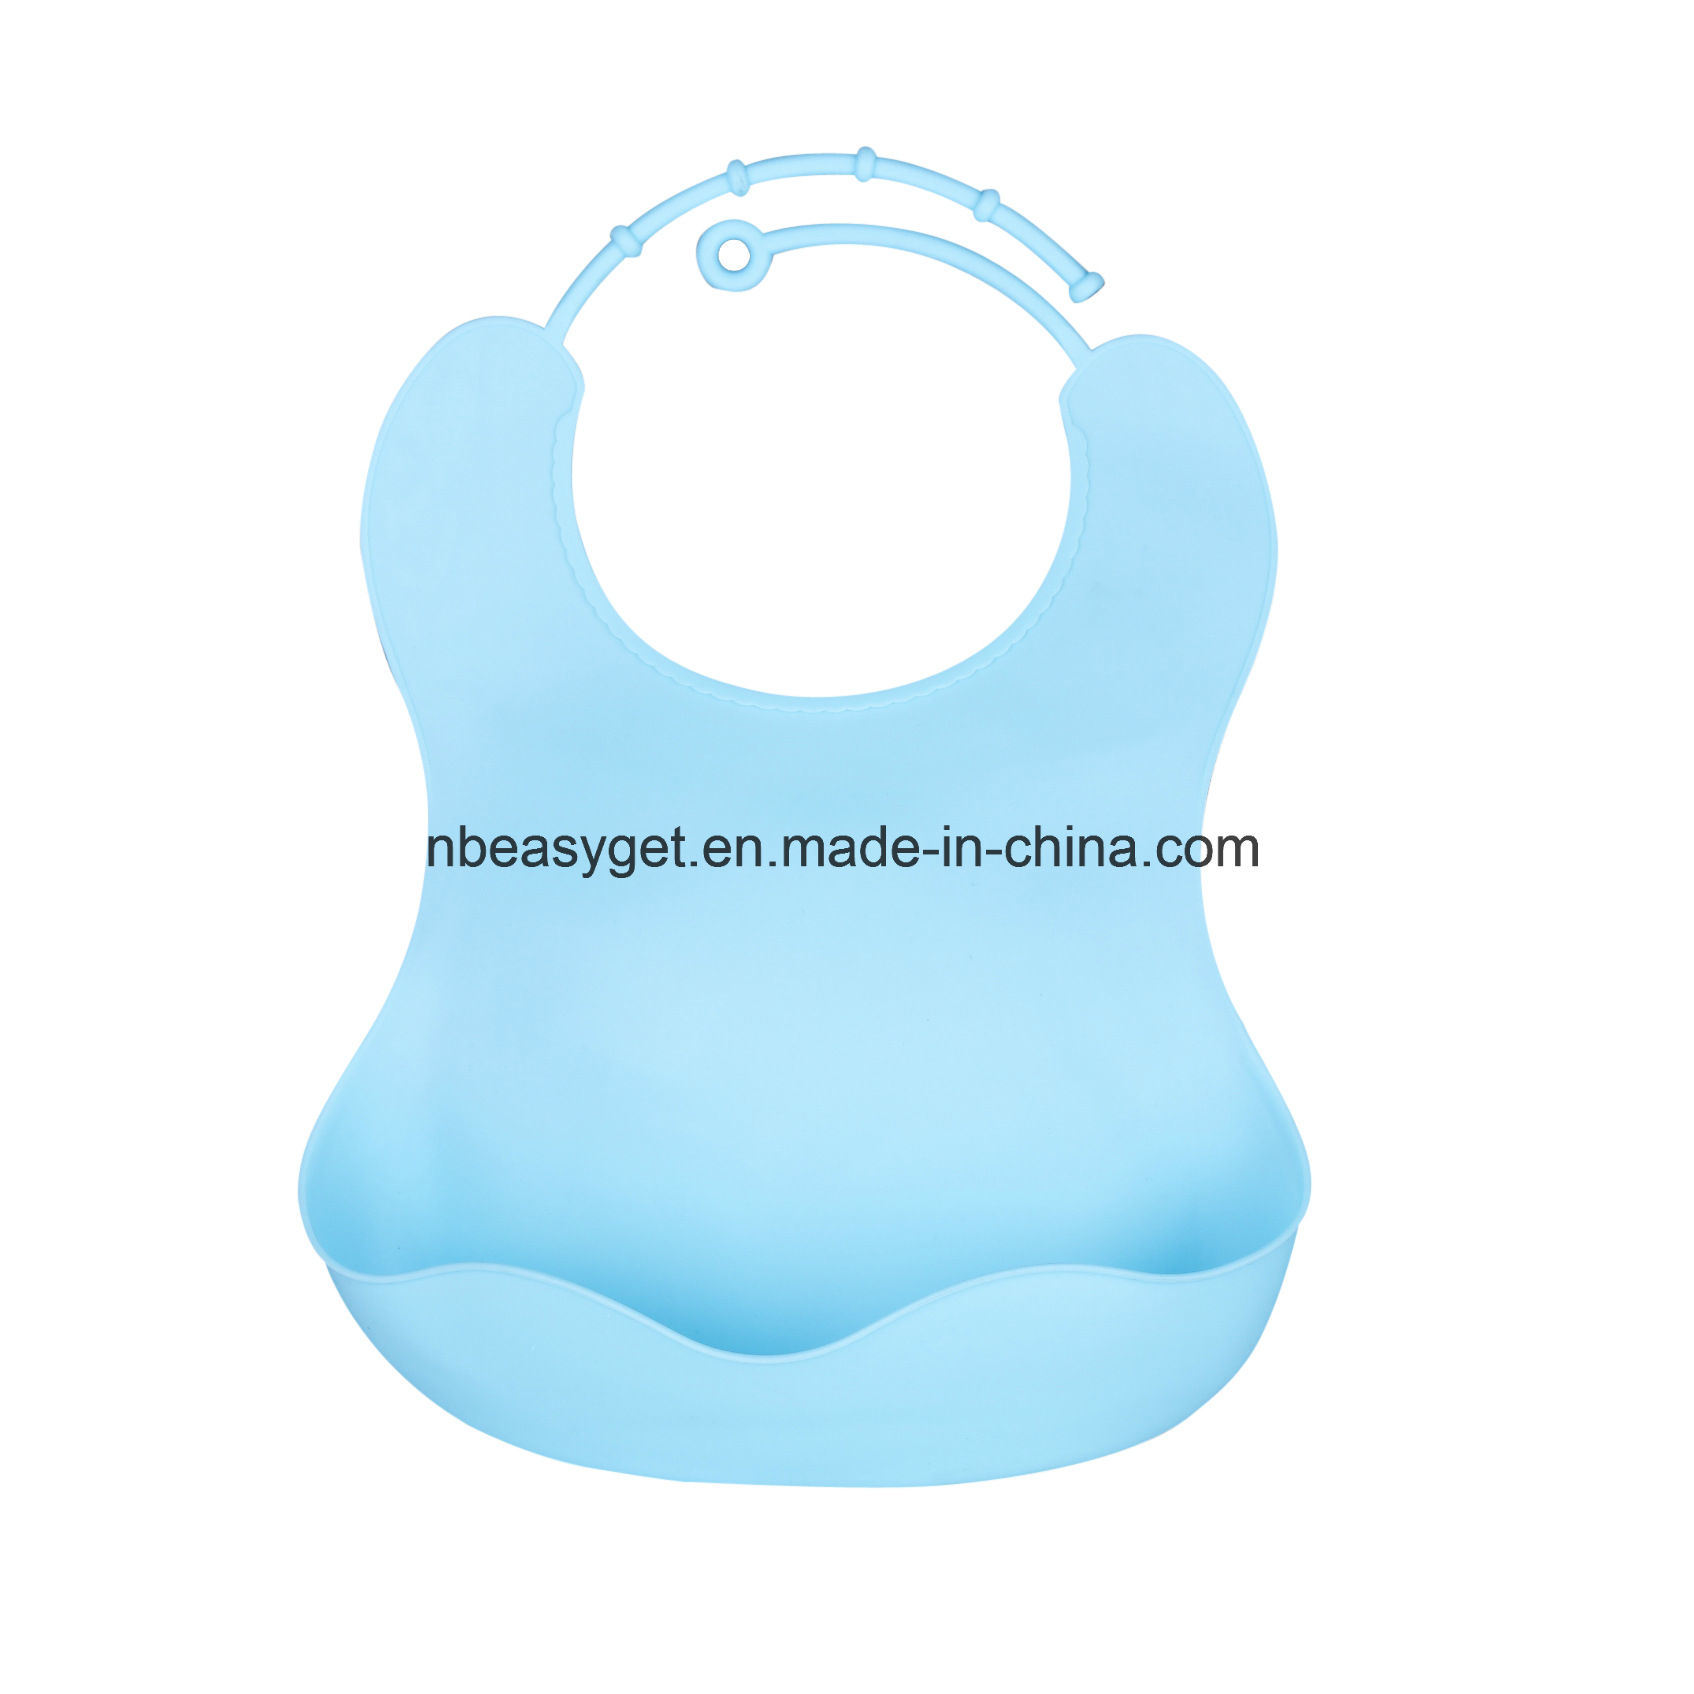 Waterproof Silicone Bib Easily Wipes Clean! Comfortable Soft Baby Bibs Keep Stains off! Spend Less Time Cleaning After Meals with Babies or Toddlers